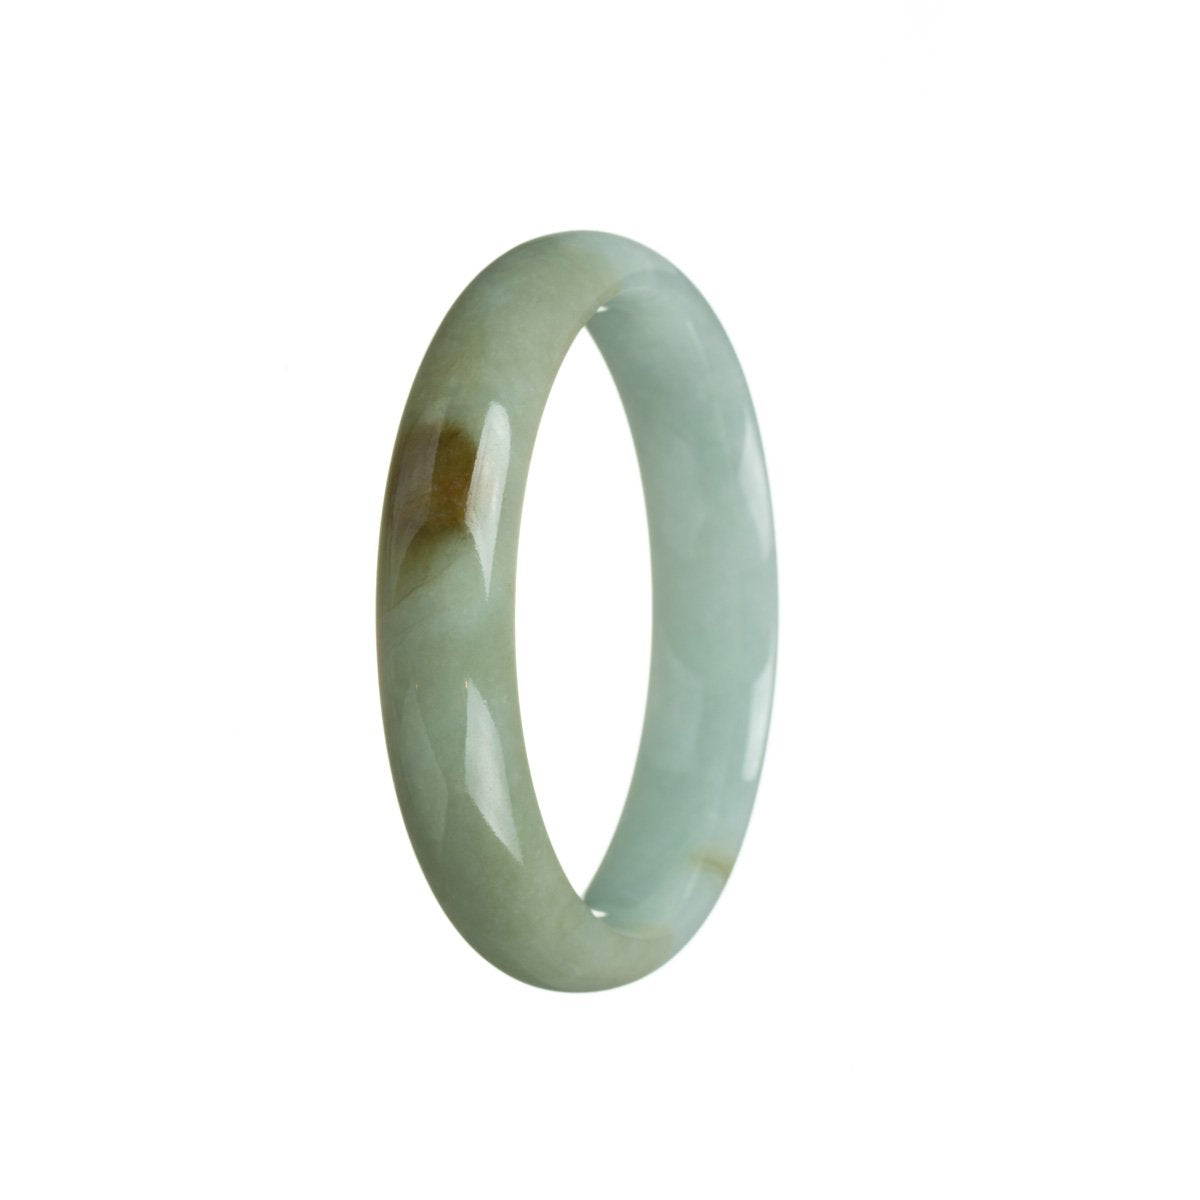 A close-up image of a half moon-shaped jade bracelet, 55mm in size, with a beautiful light green color. The bracelet is made of authentic, natural jade and is sold by MAYS.